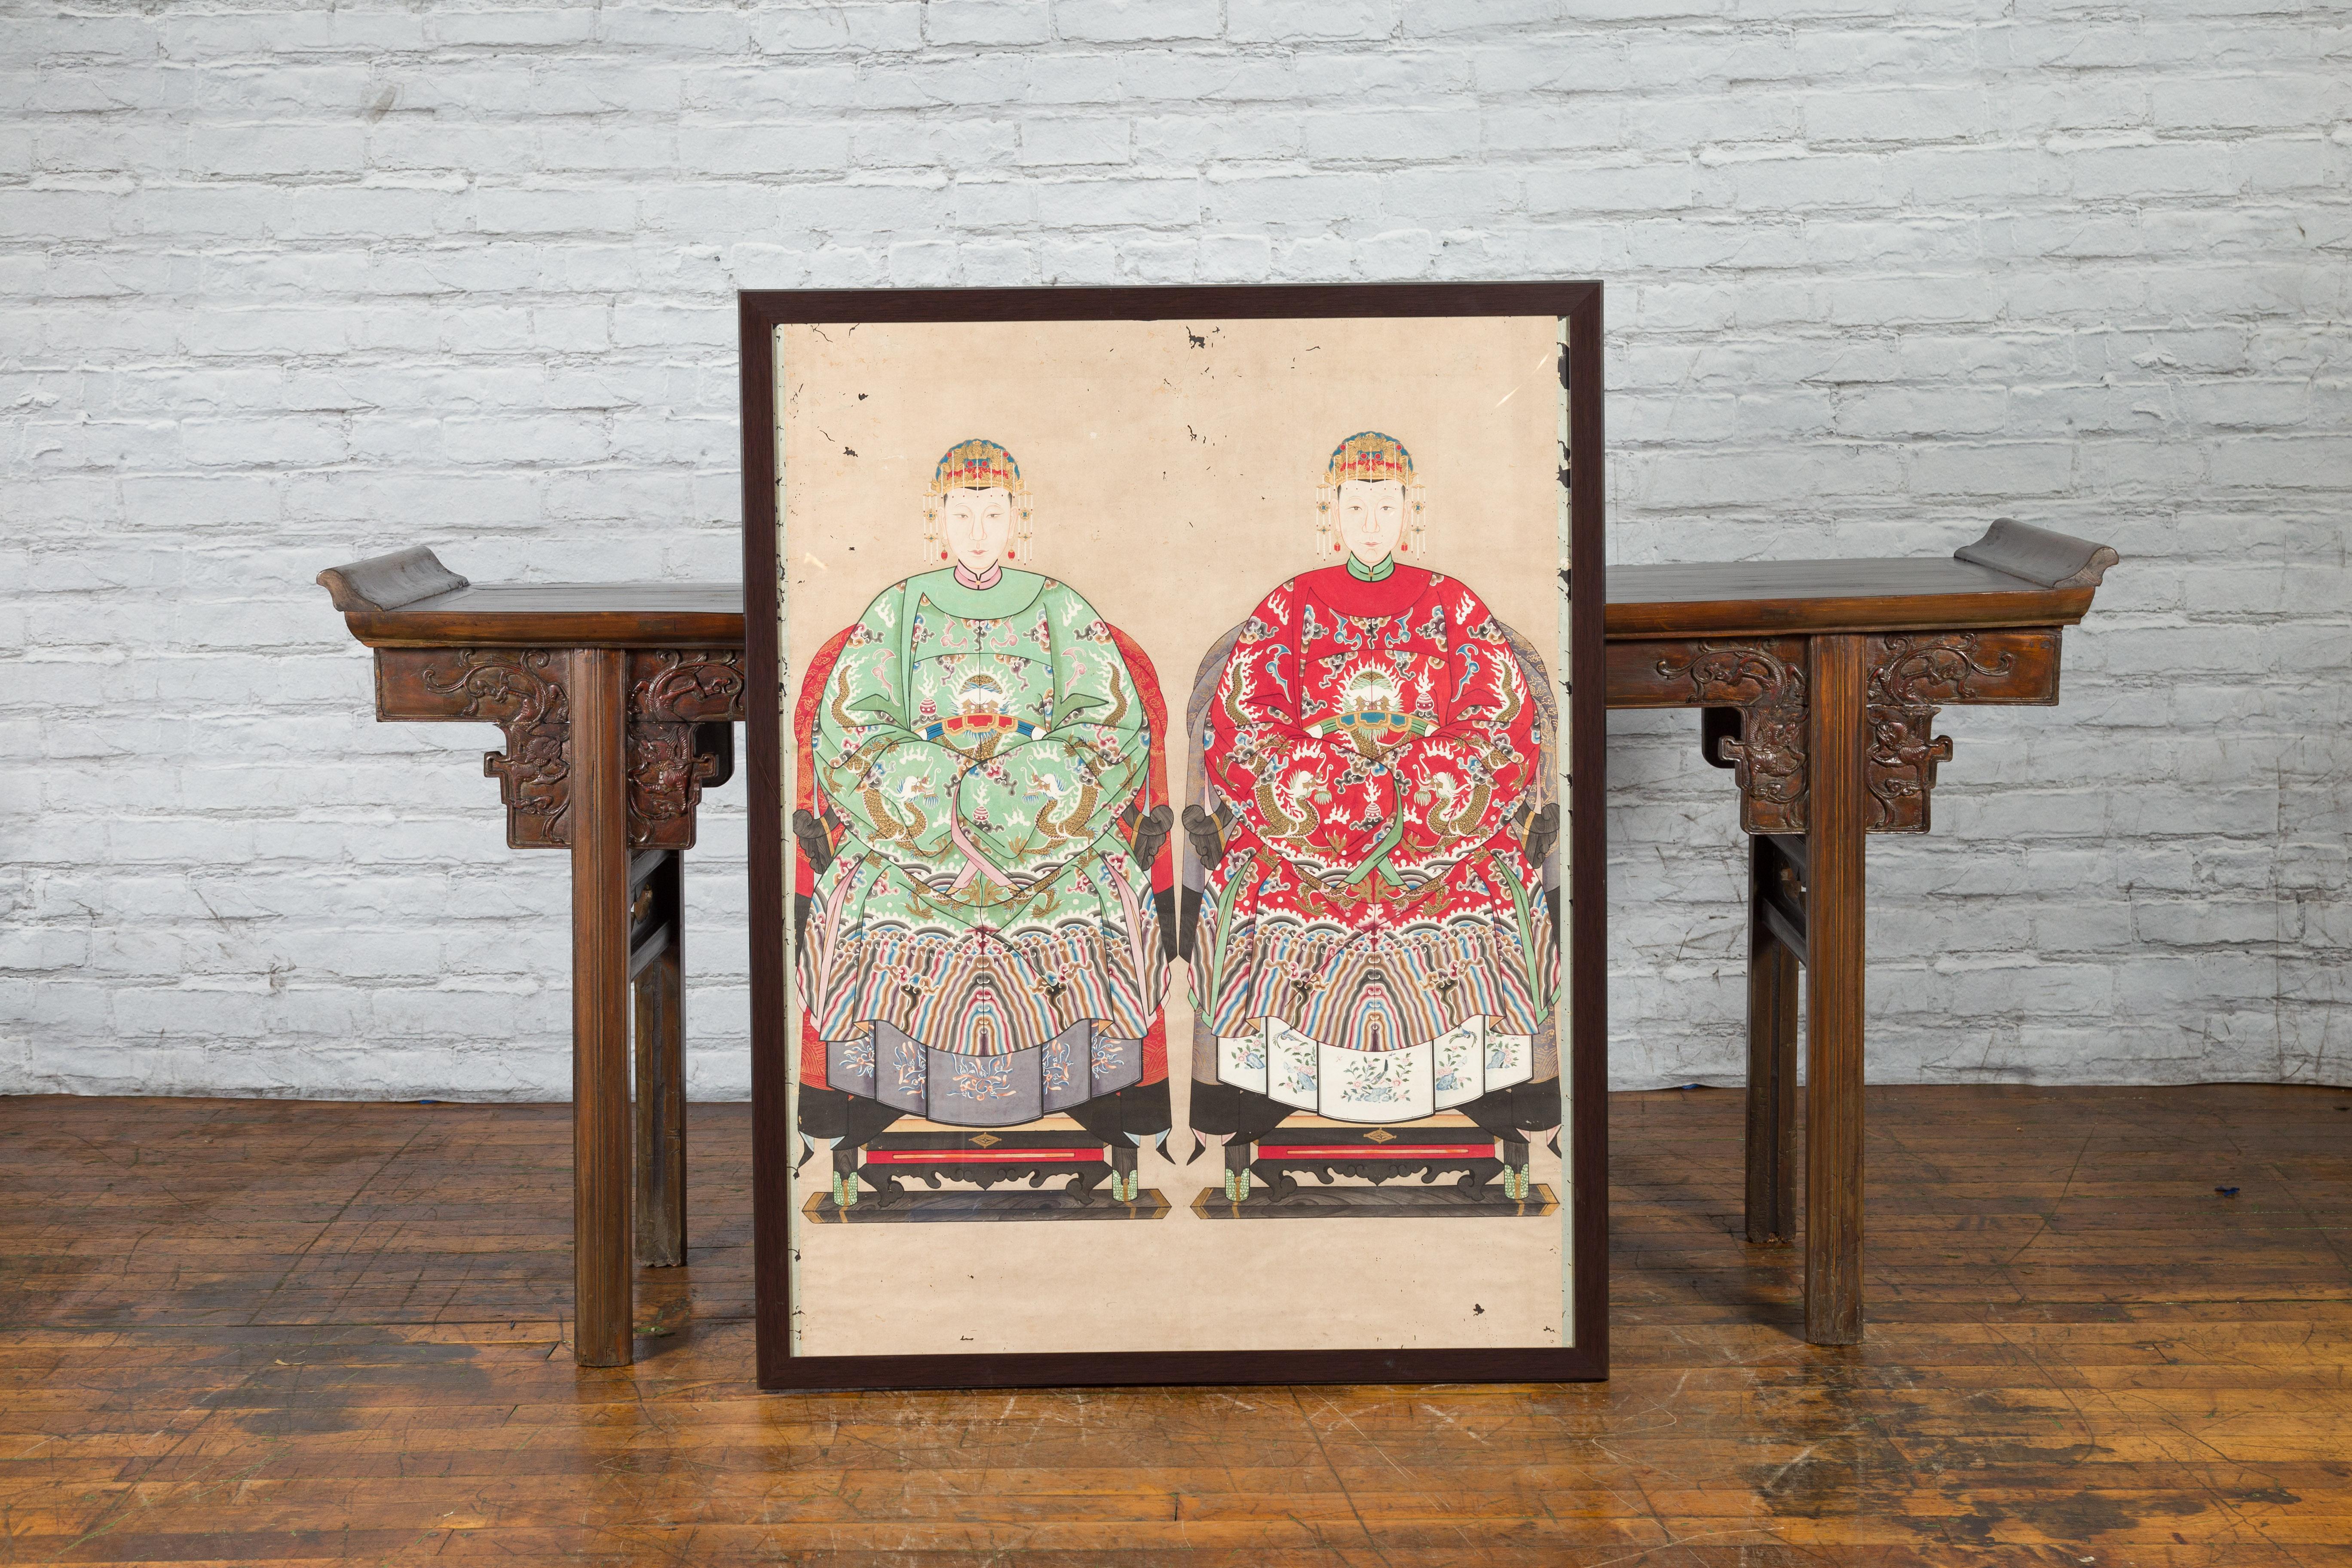 A Chinese late Qing Dynasty period framed painting from the early 20th century of a royalty related couple with dragon motifs painted on a linen canvas. Created in China during the late Qing Dynasty in the early years of the 20th century, this